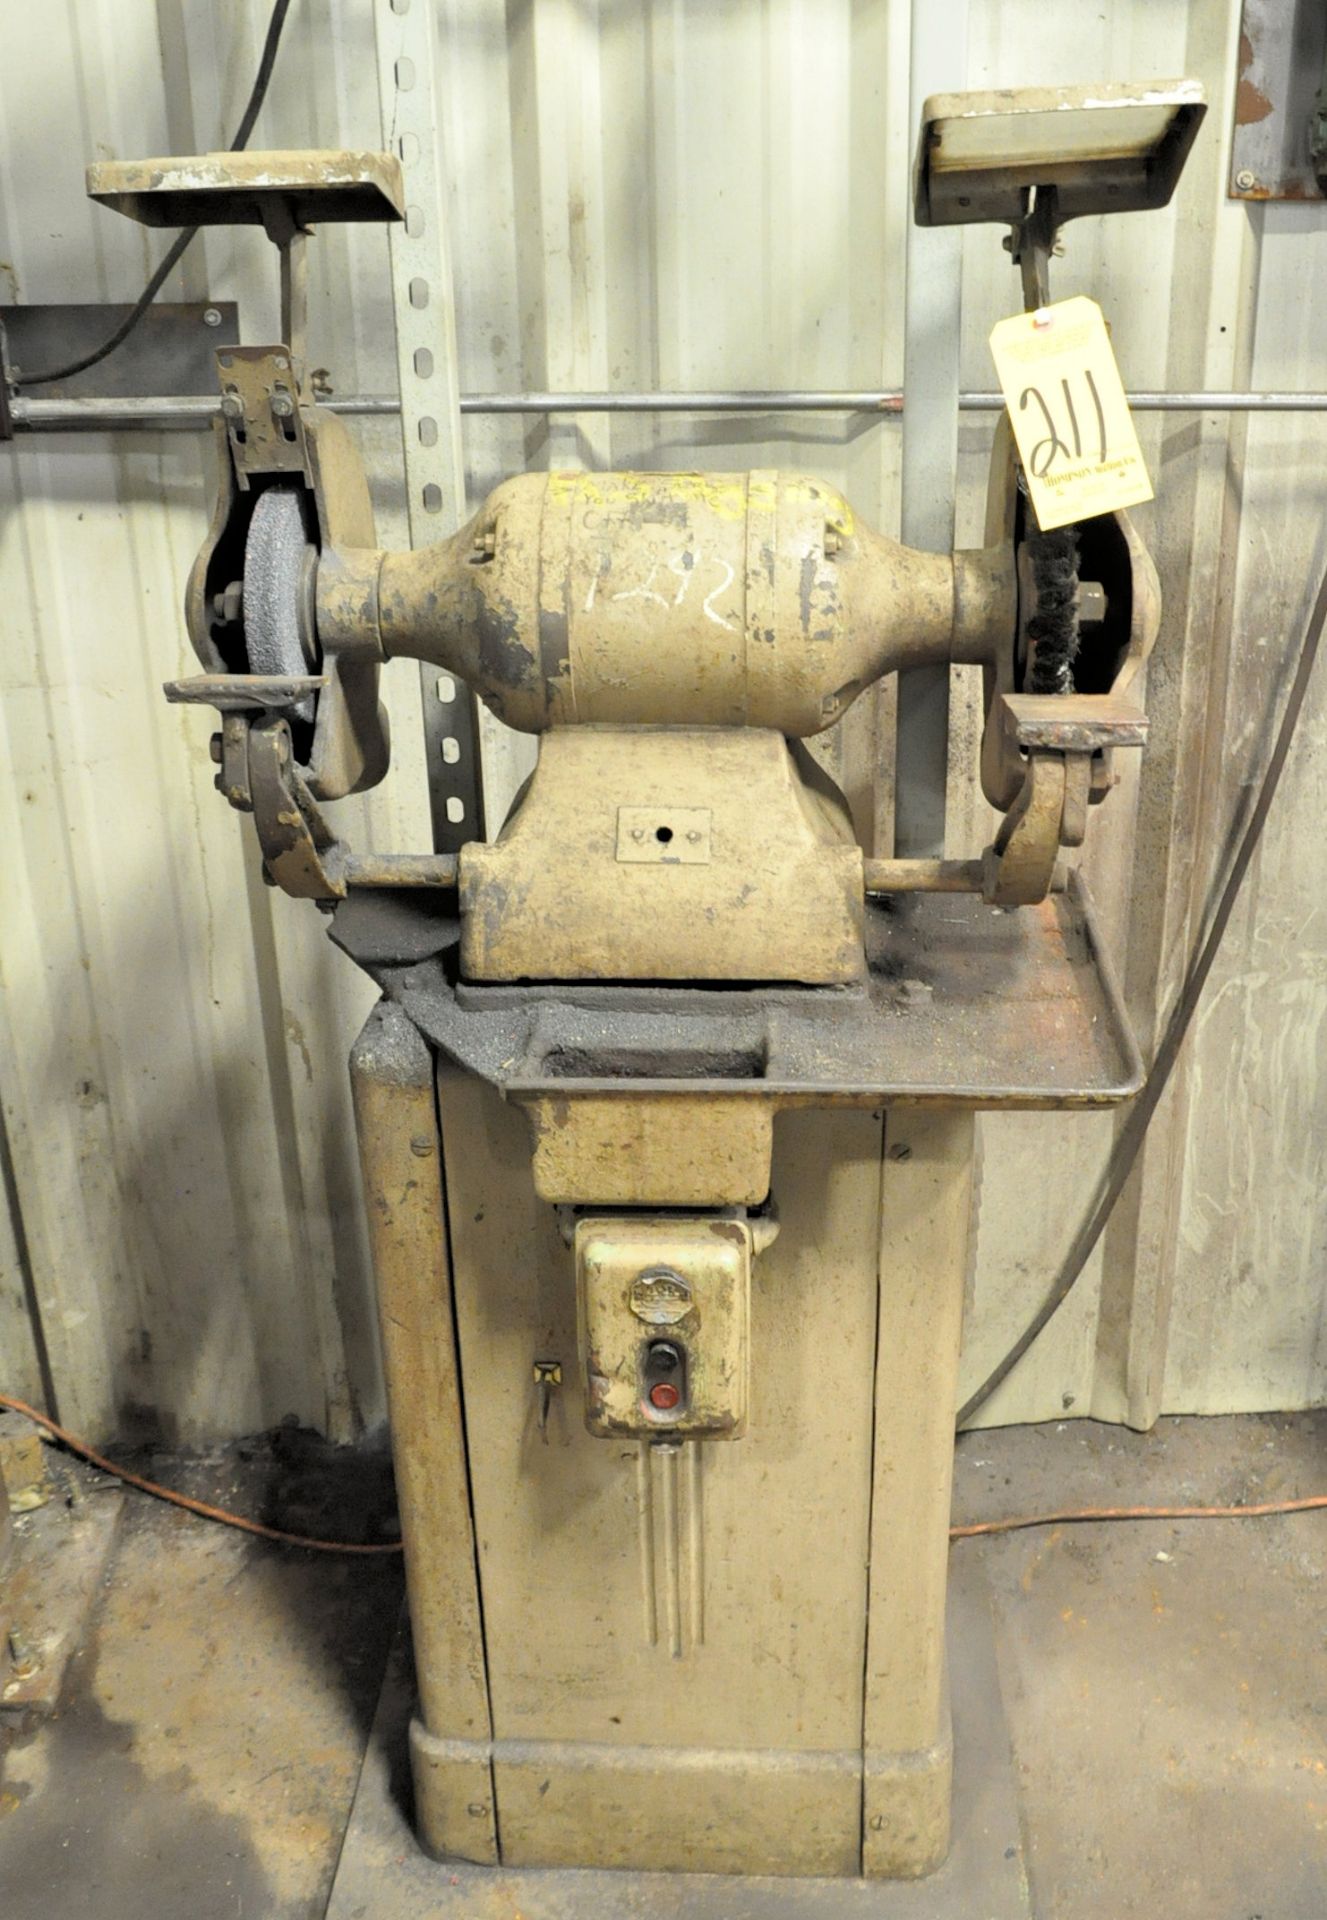 Stanley 10" x 1-HP Double End Cabinet Base Grinder, 3-PH, Loading Fee $50.00